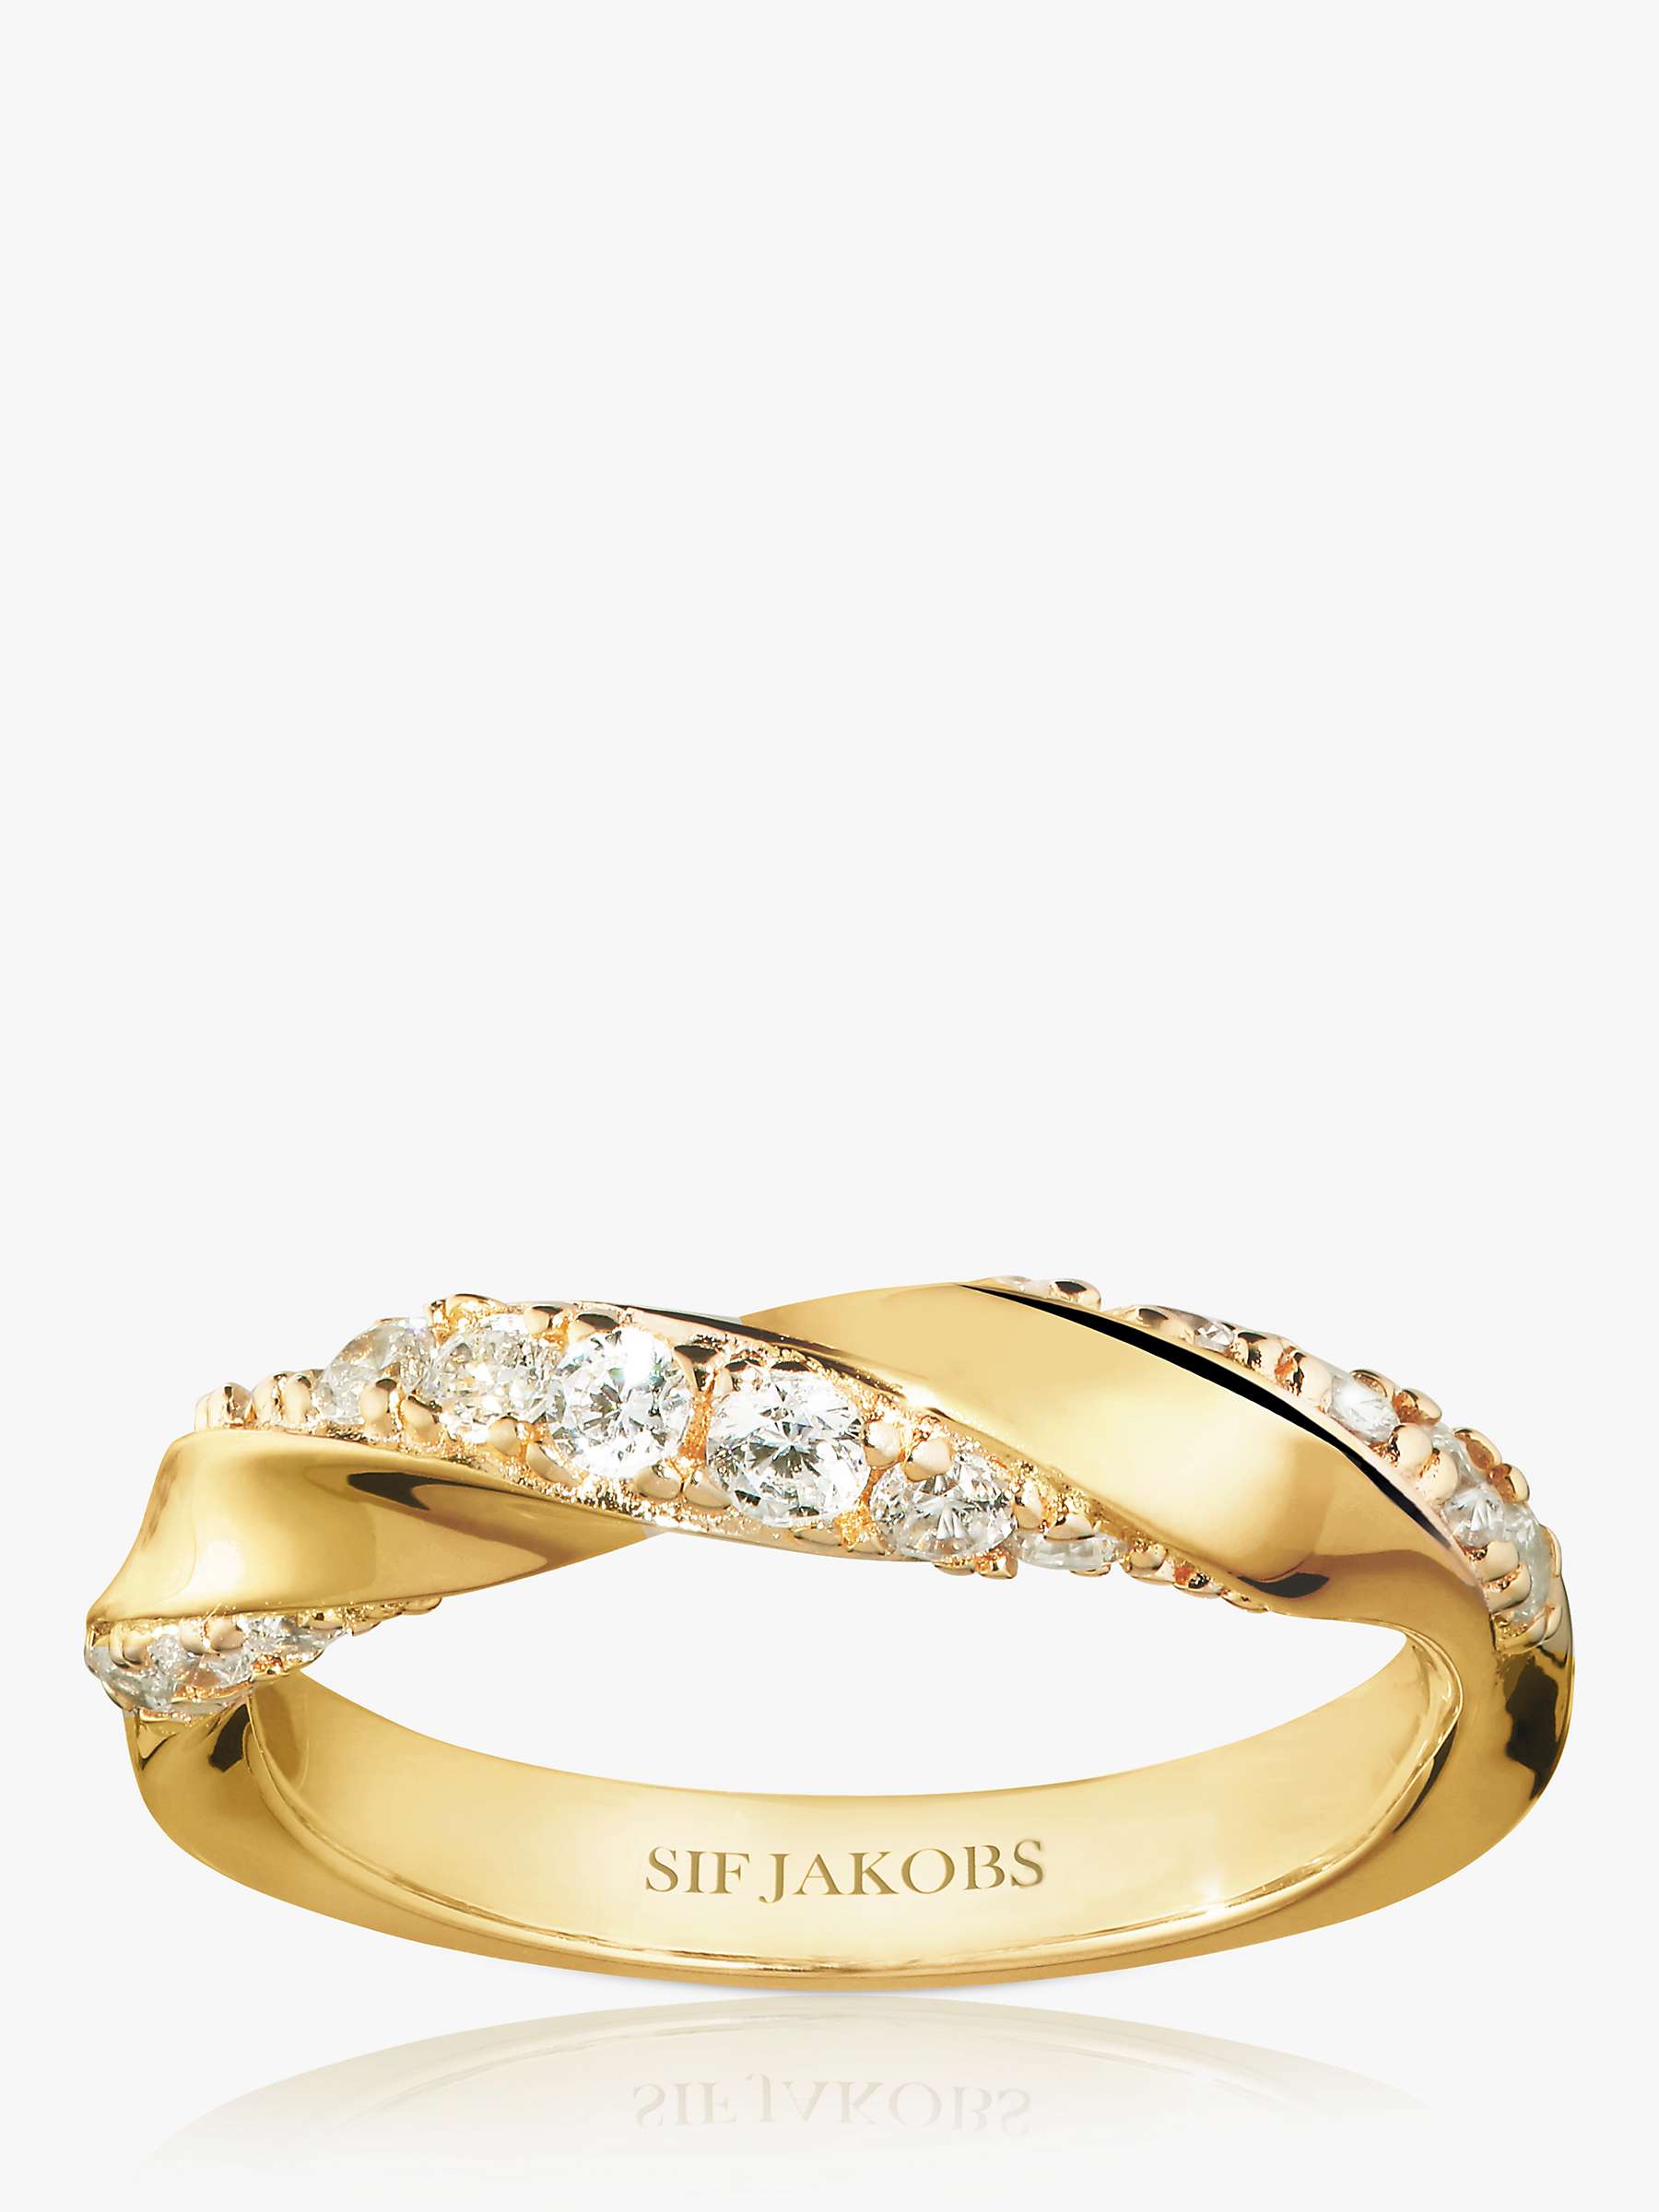 Buy Sif Jakobs Jewellery Ferrara Twisted Cubic Zirconia Band Ring, Gold Online at johnlewis.com